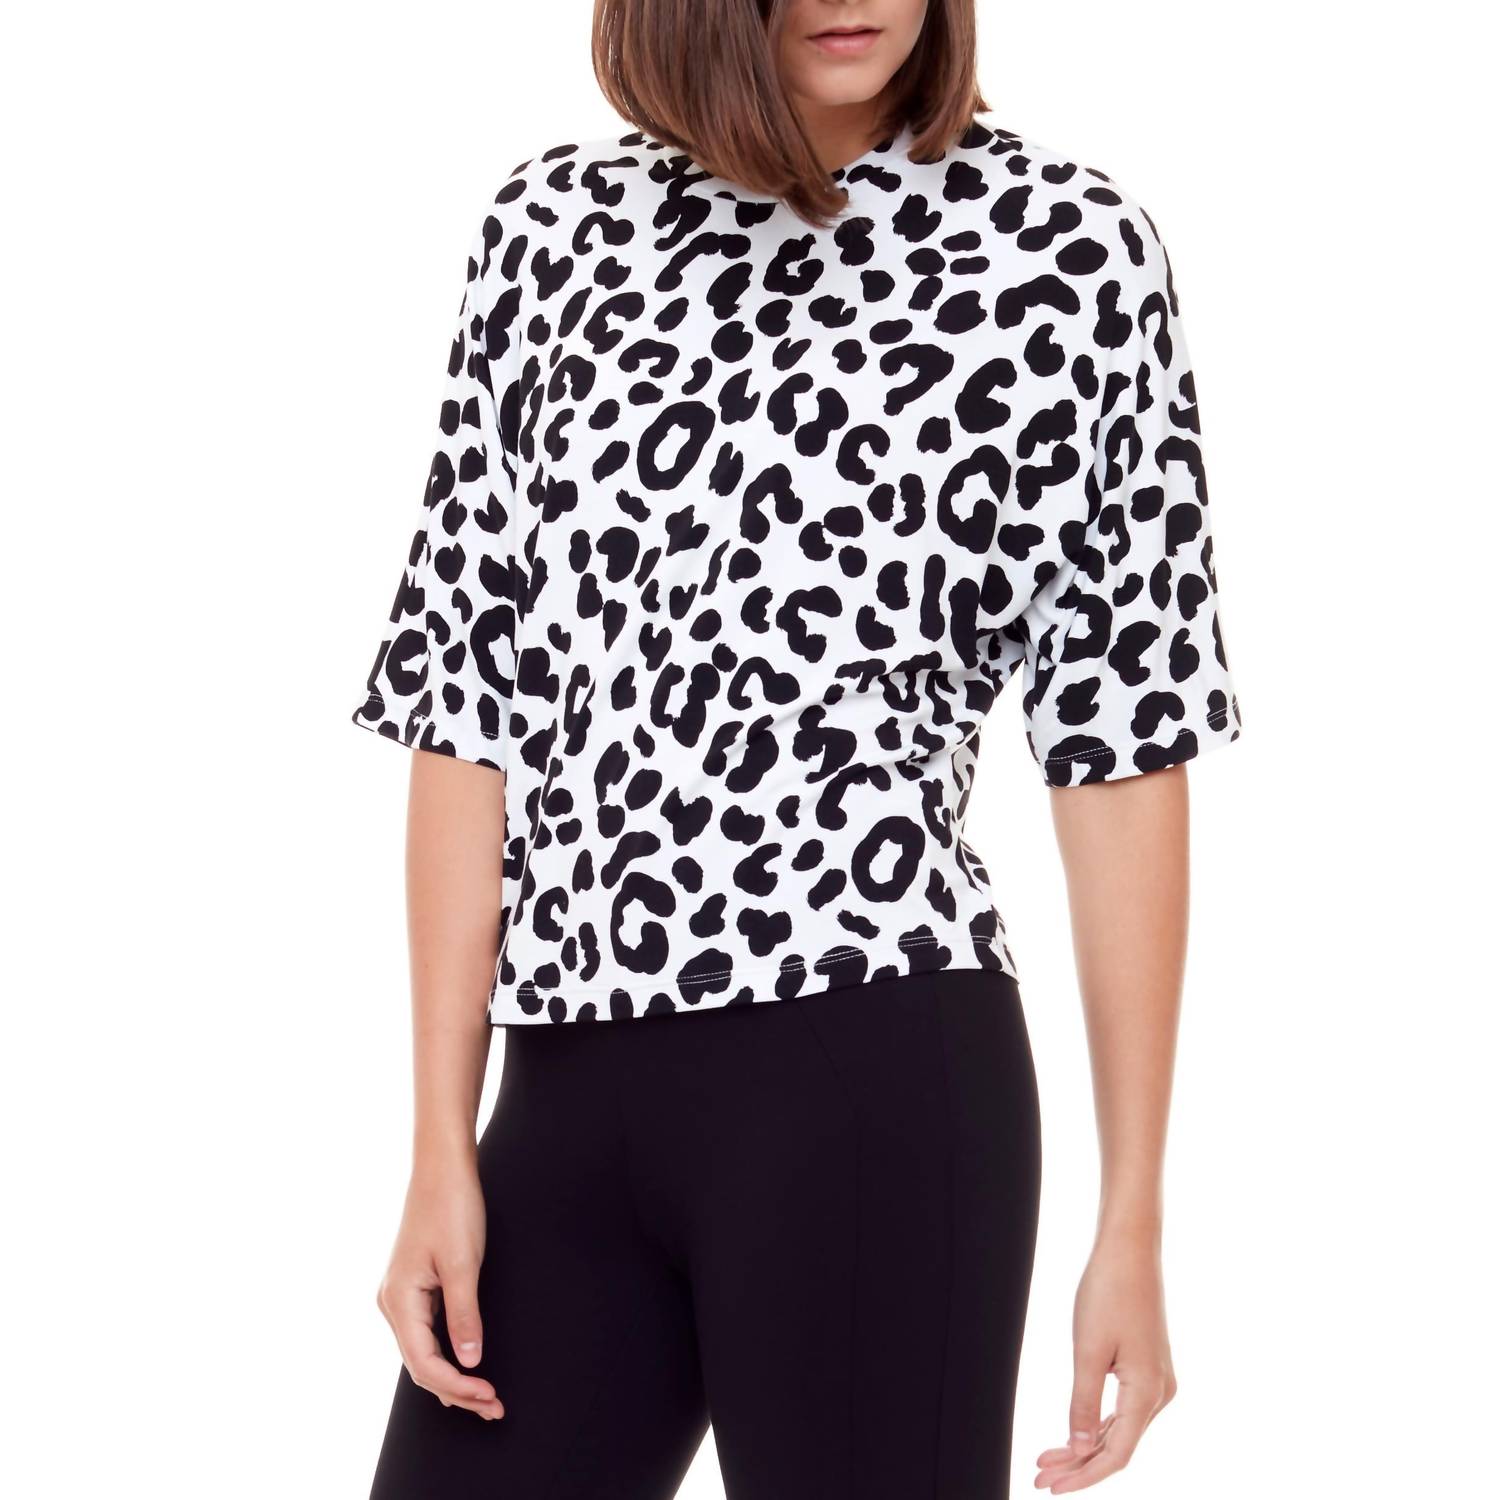 Up&excl; Bamboo Lynx Print Crewneck Top In Black&sol;white